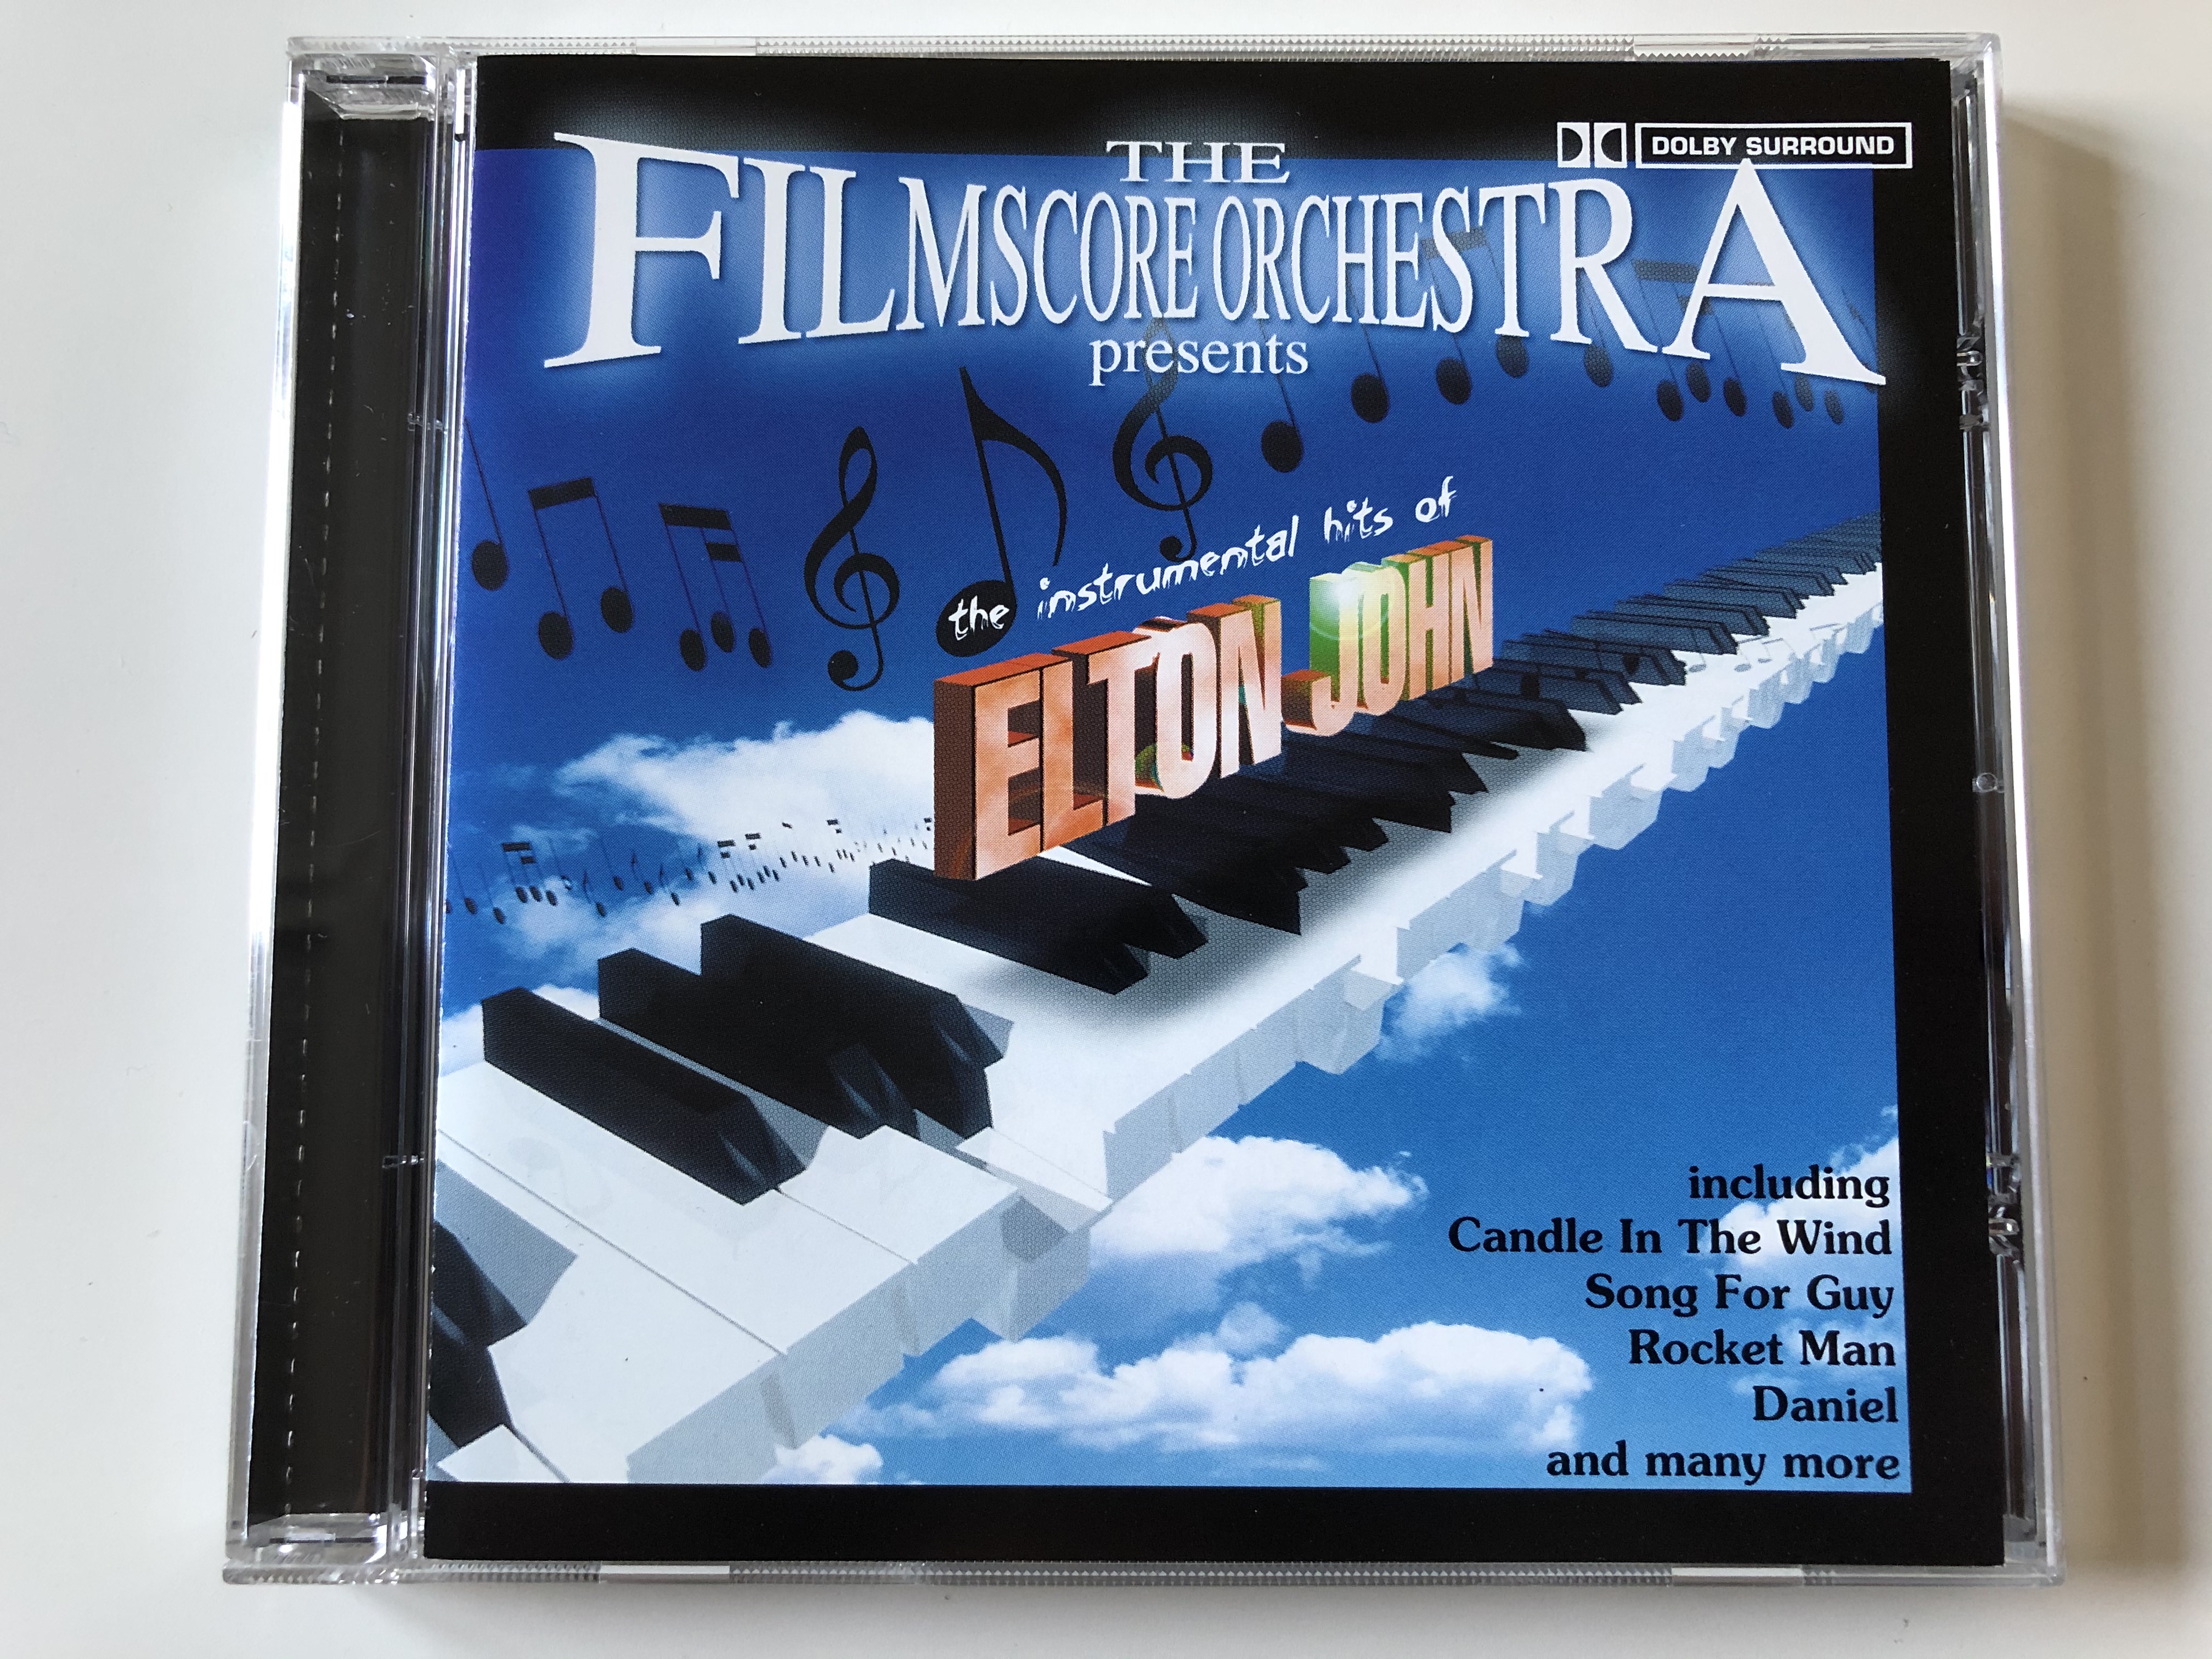 the-film-score-orchestra-presents-the-instrumental-hits-of-elton-john-including-candle-in-the-wind-song-for-guy-rocket-man-daniel-and-many-more-going-for-a-song-audio-cd-gfs126-1-.jpg